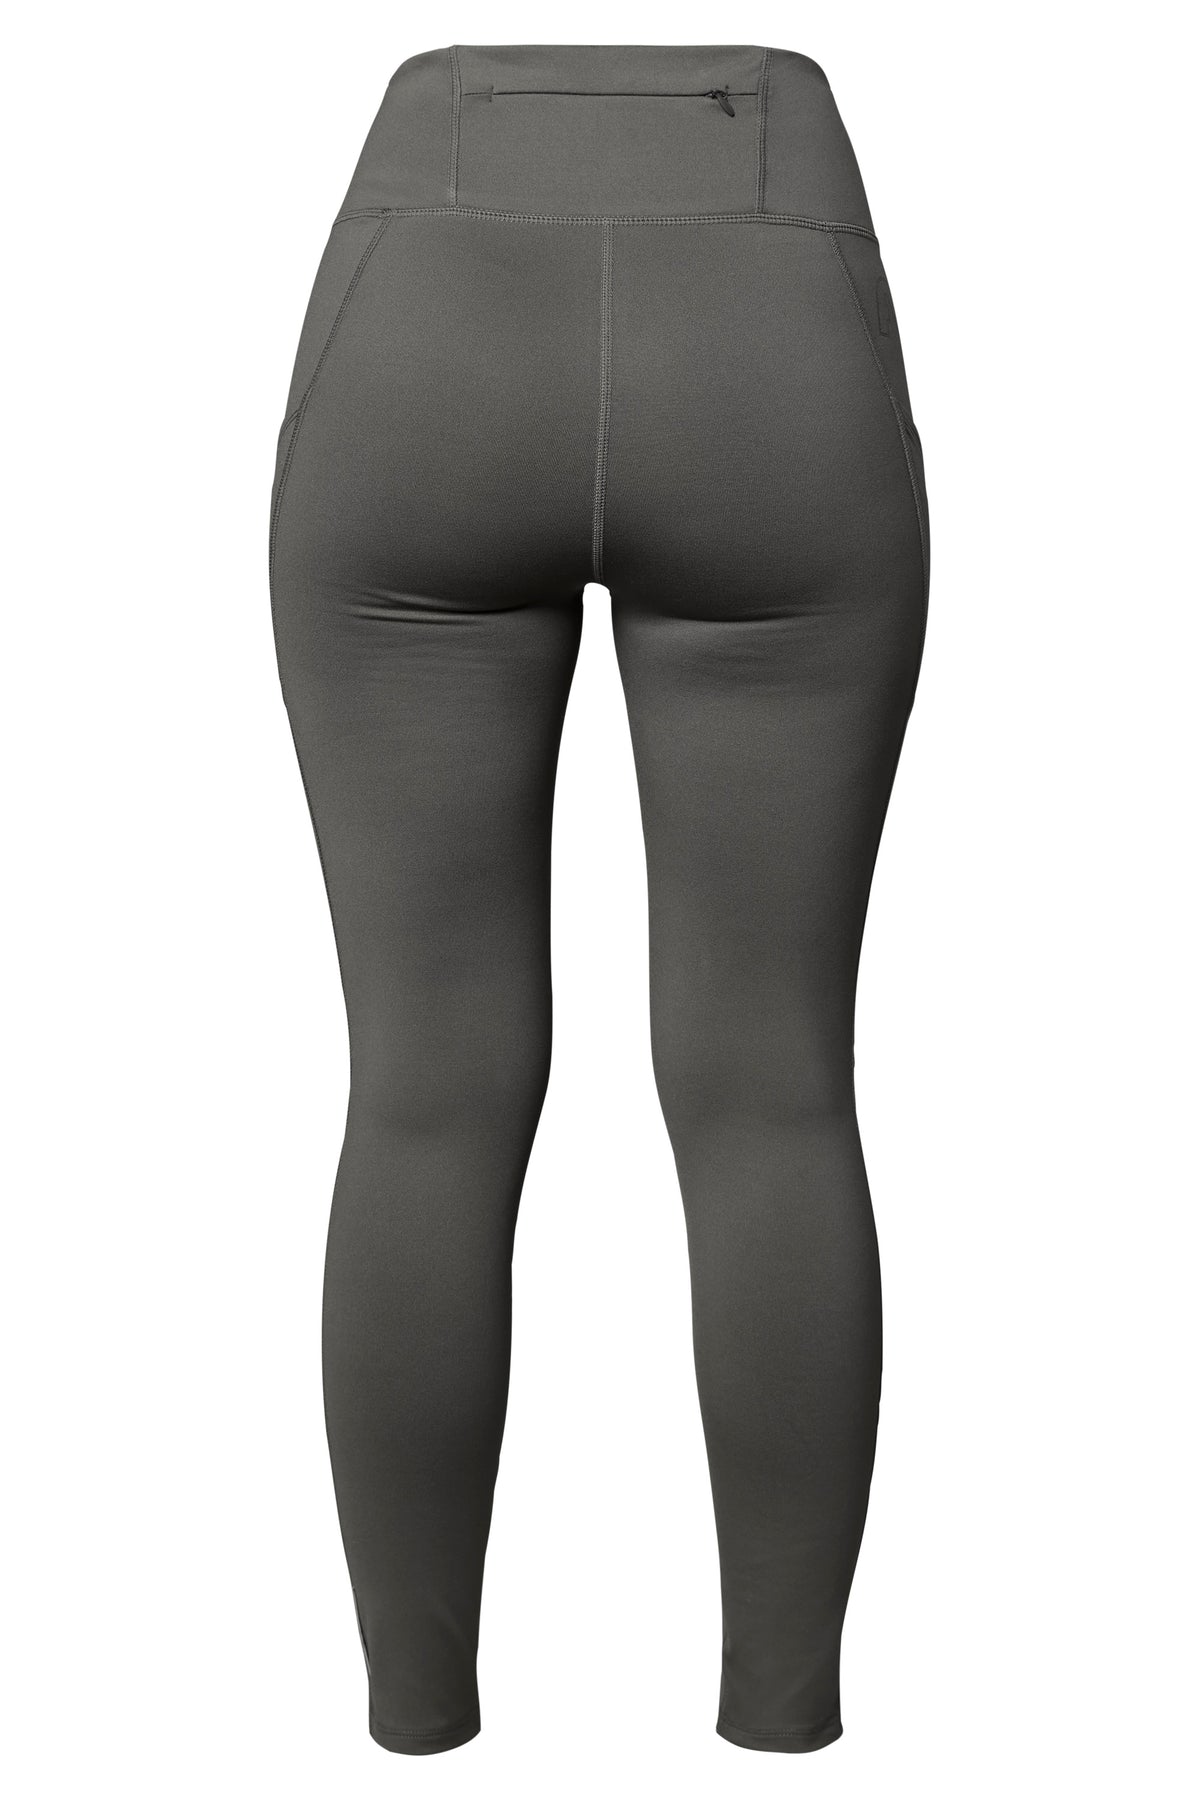 top quality outlet Lululemon Tight Stuff Tight II in Redwood